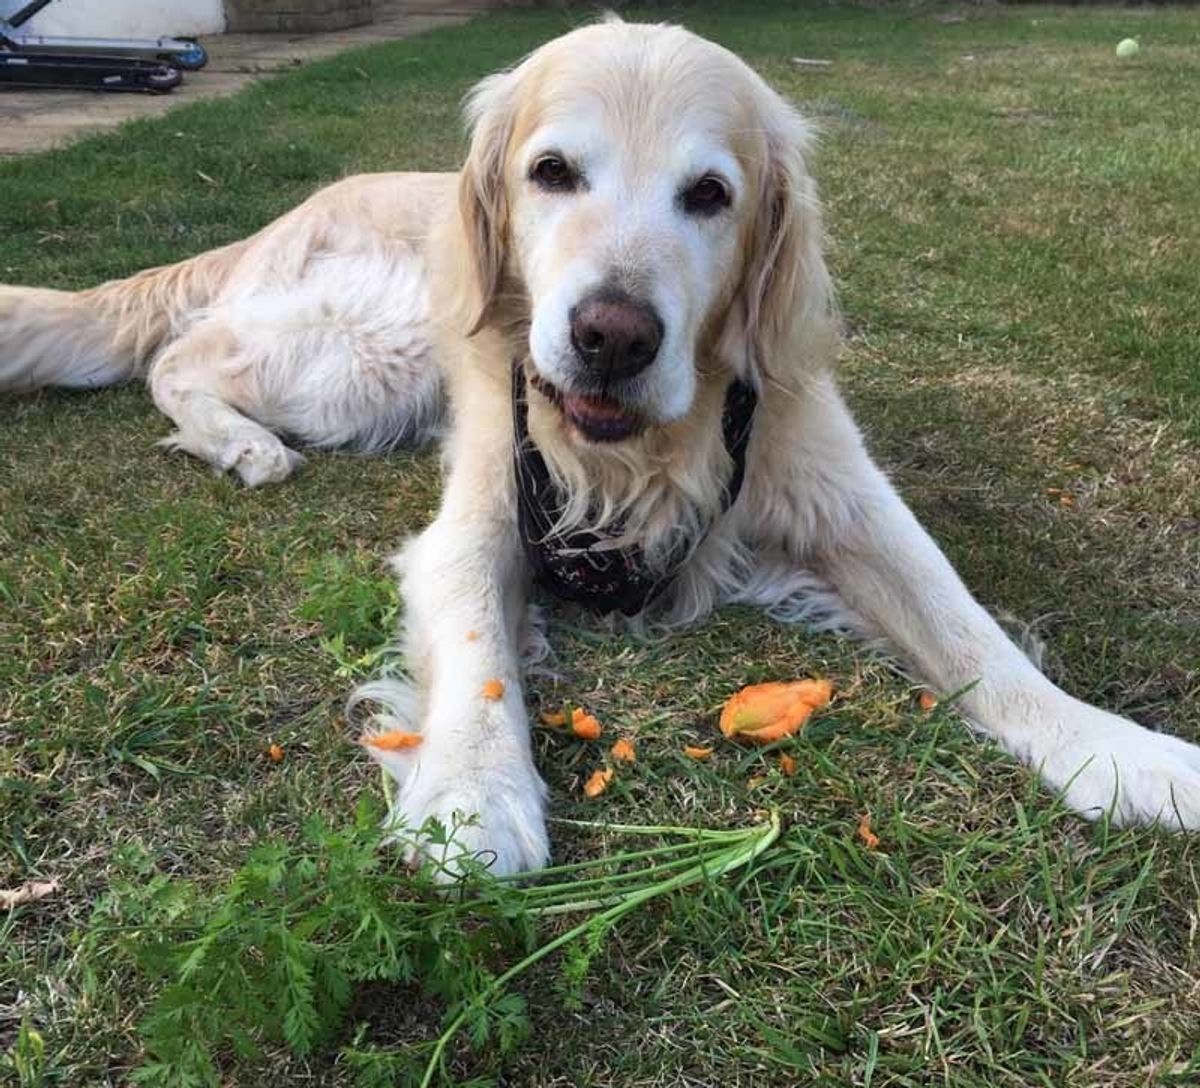 Dog Turns Vegetarian After Chowing Down On BBQ Remains Left Him Needing Surgery